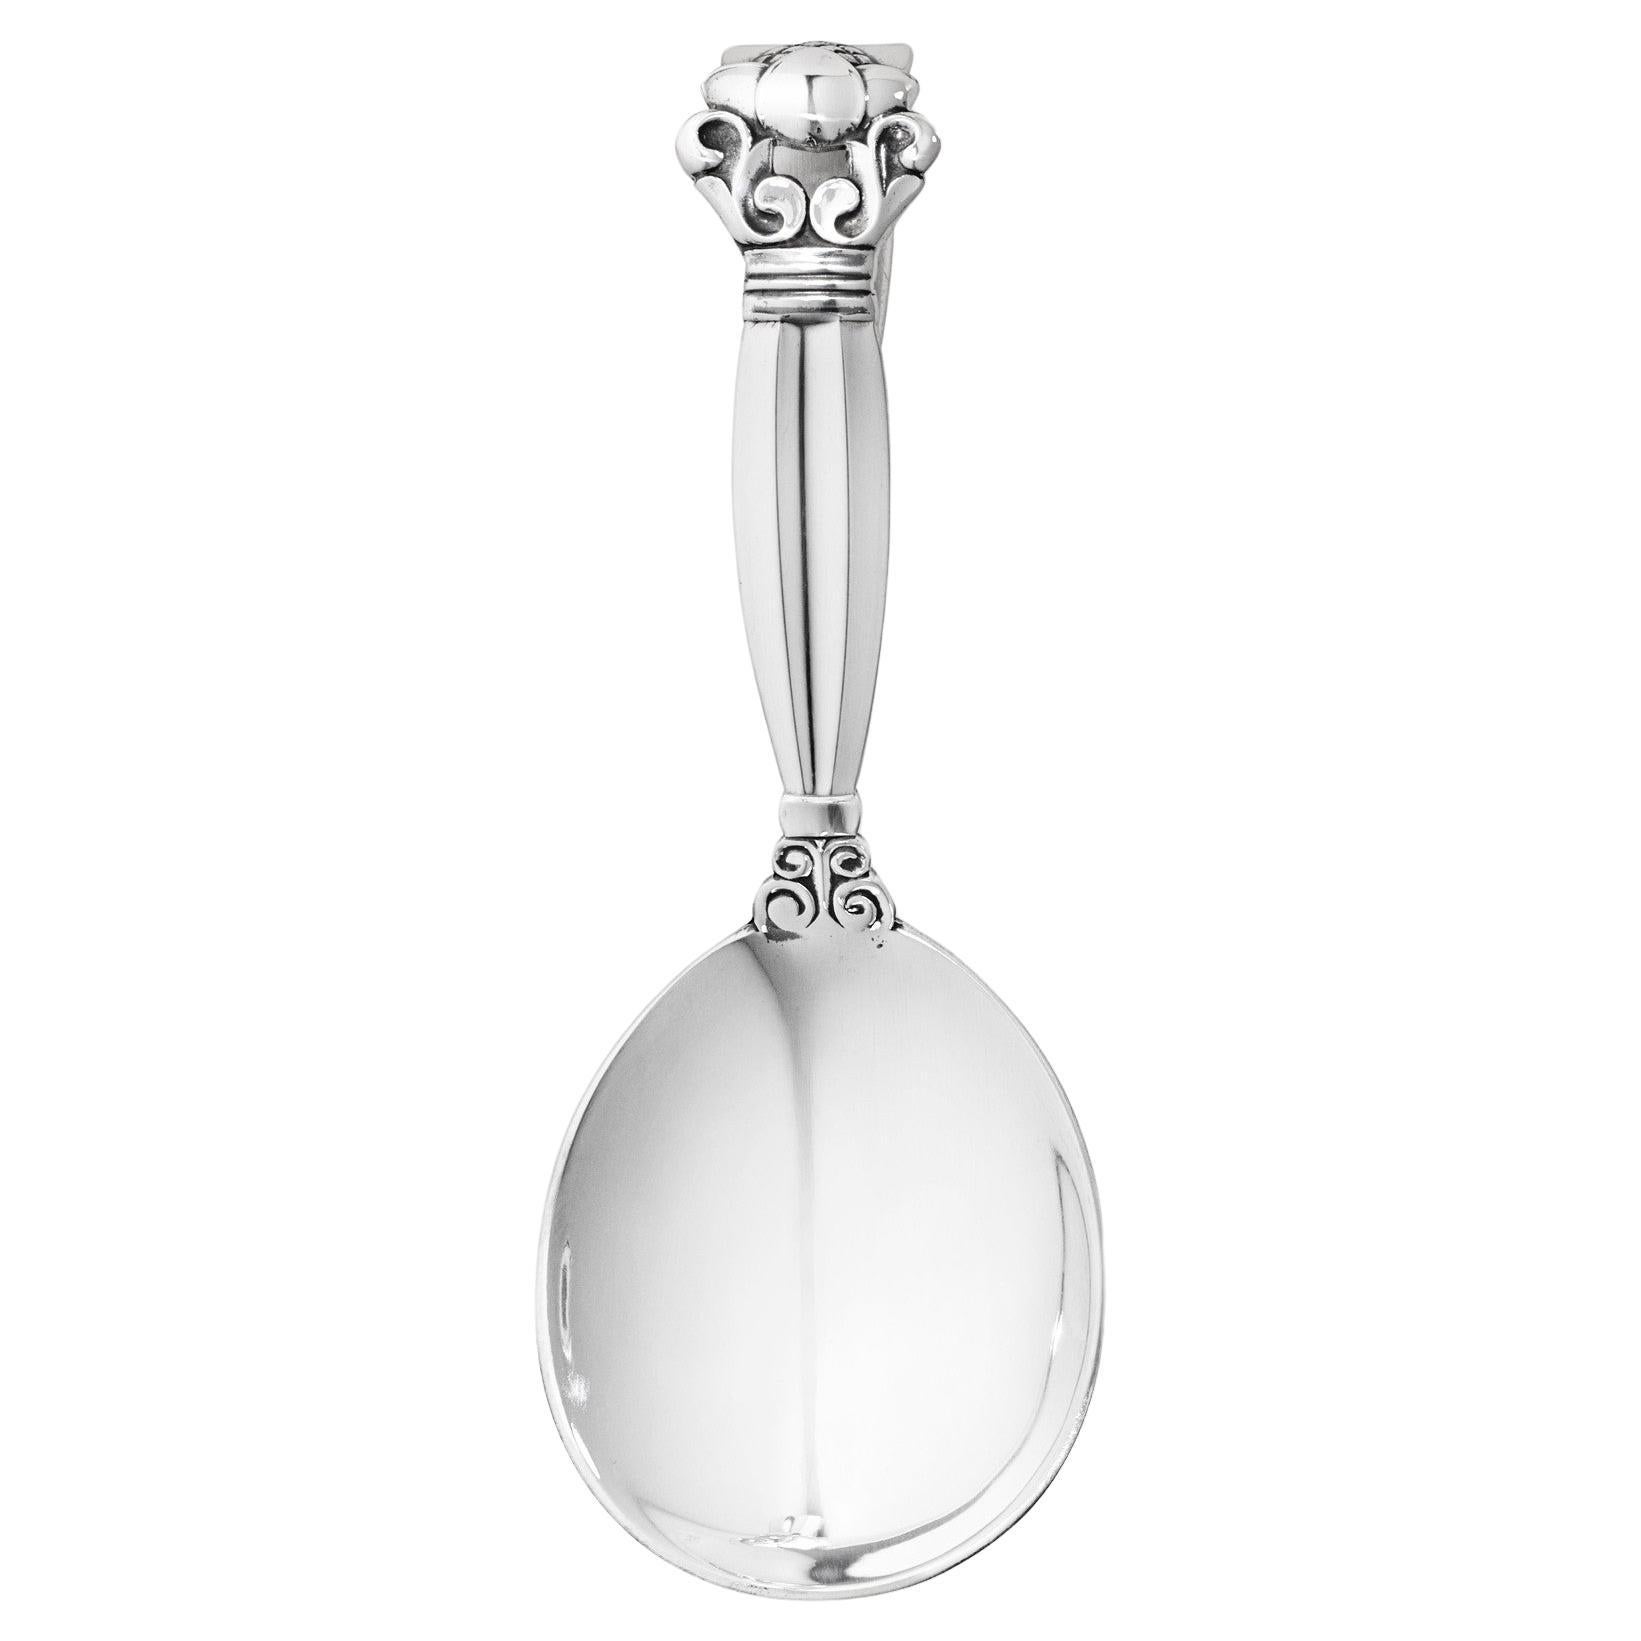 NEW Georg Jensen Acorn Sterling Silver Baby Spoon, Curved Handle 095